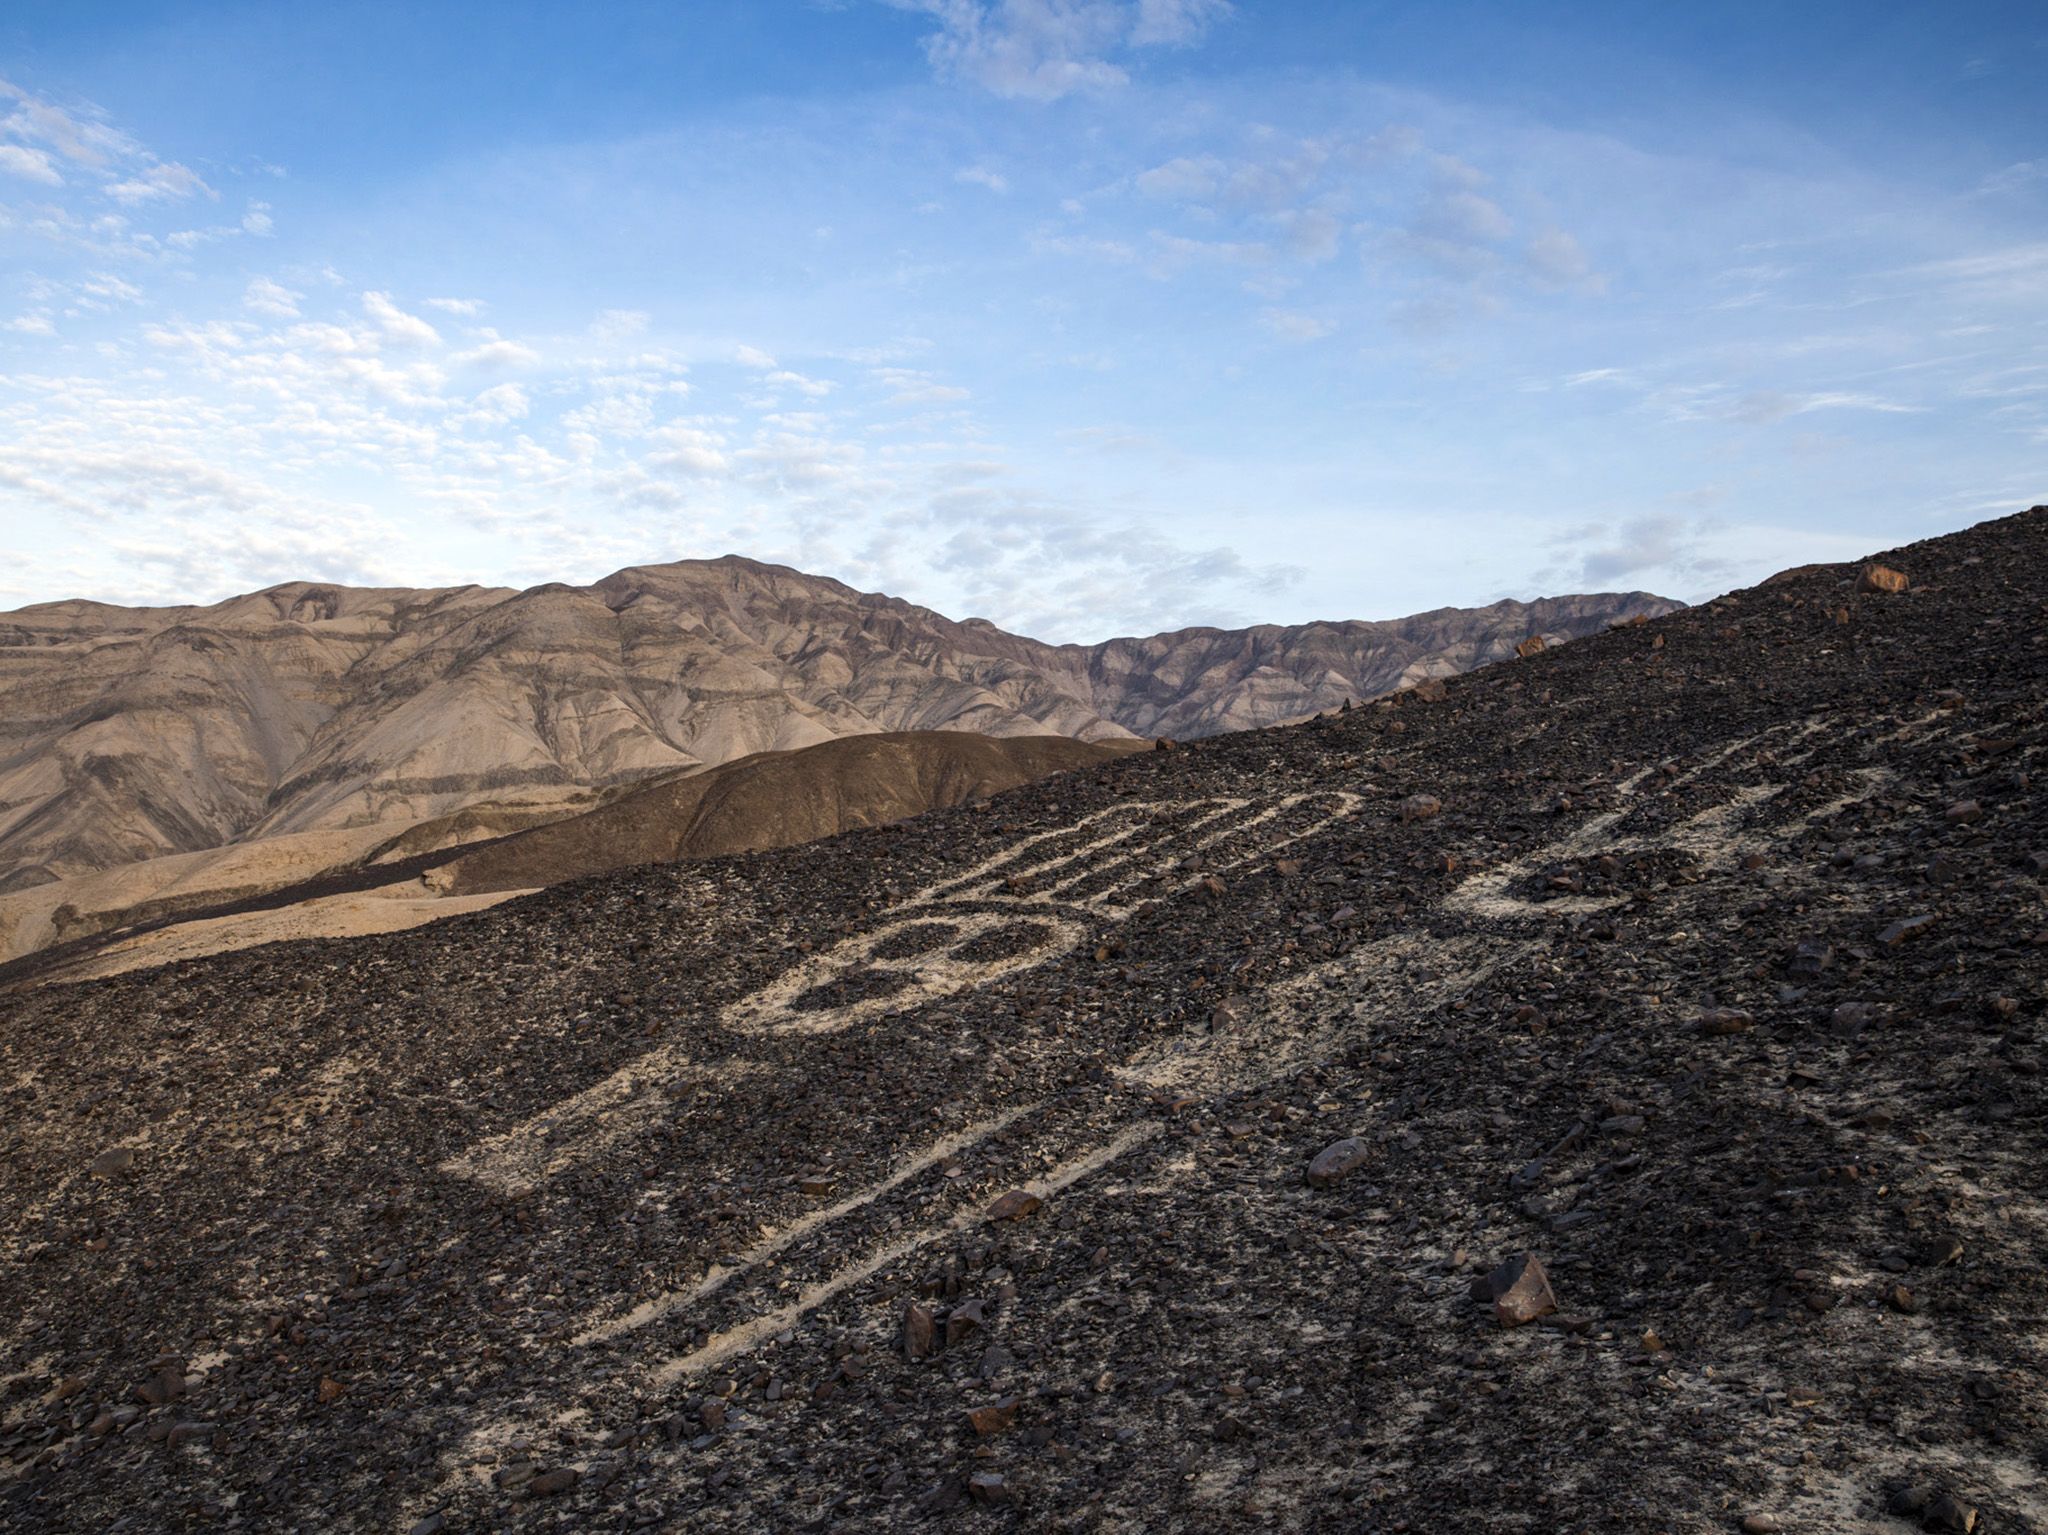 The Nasca Lines of Peru: ancient images of animals and vast geometric designs etched in the... [Photo of the day - September 2019]